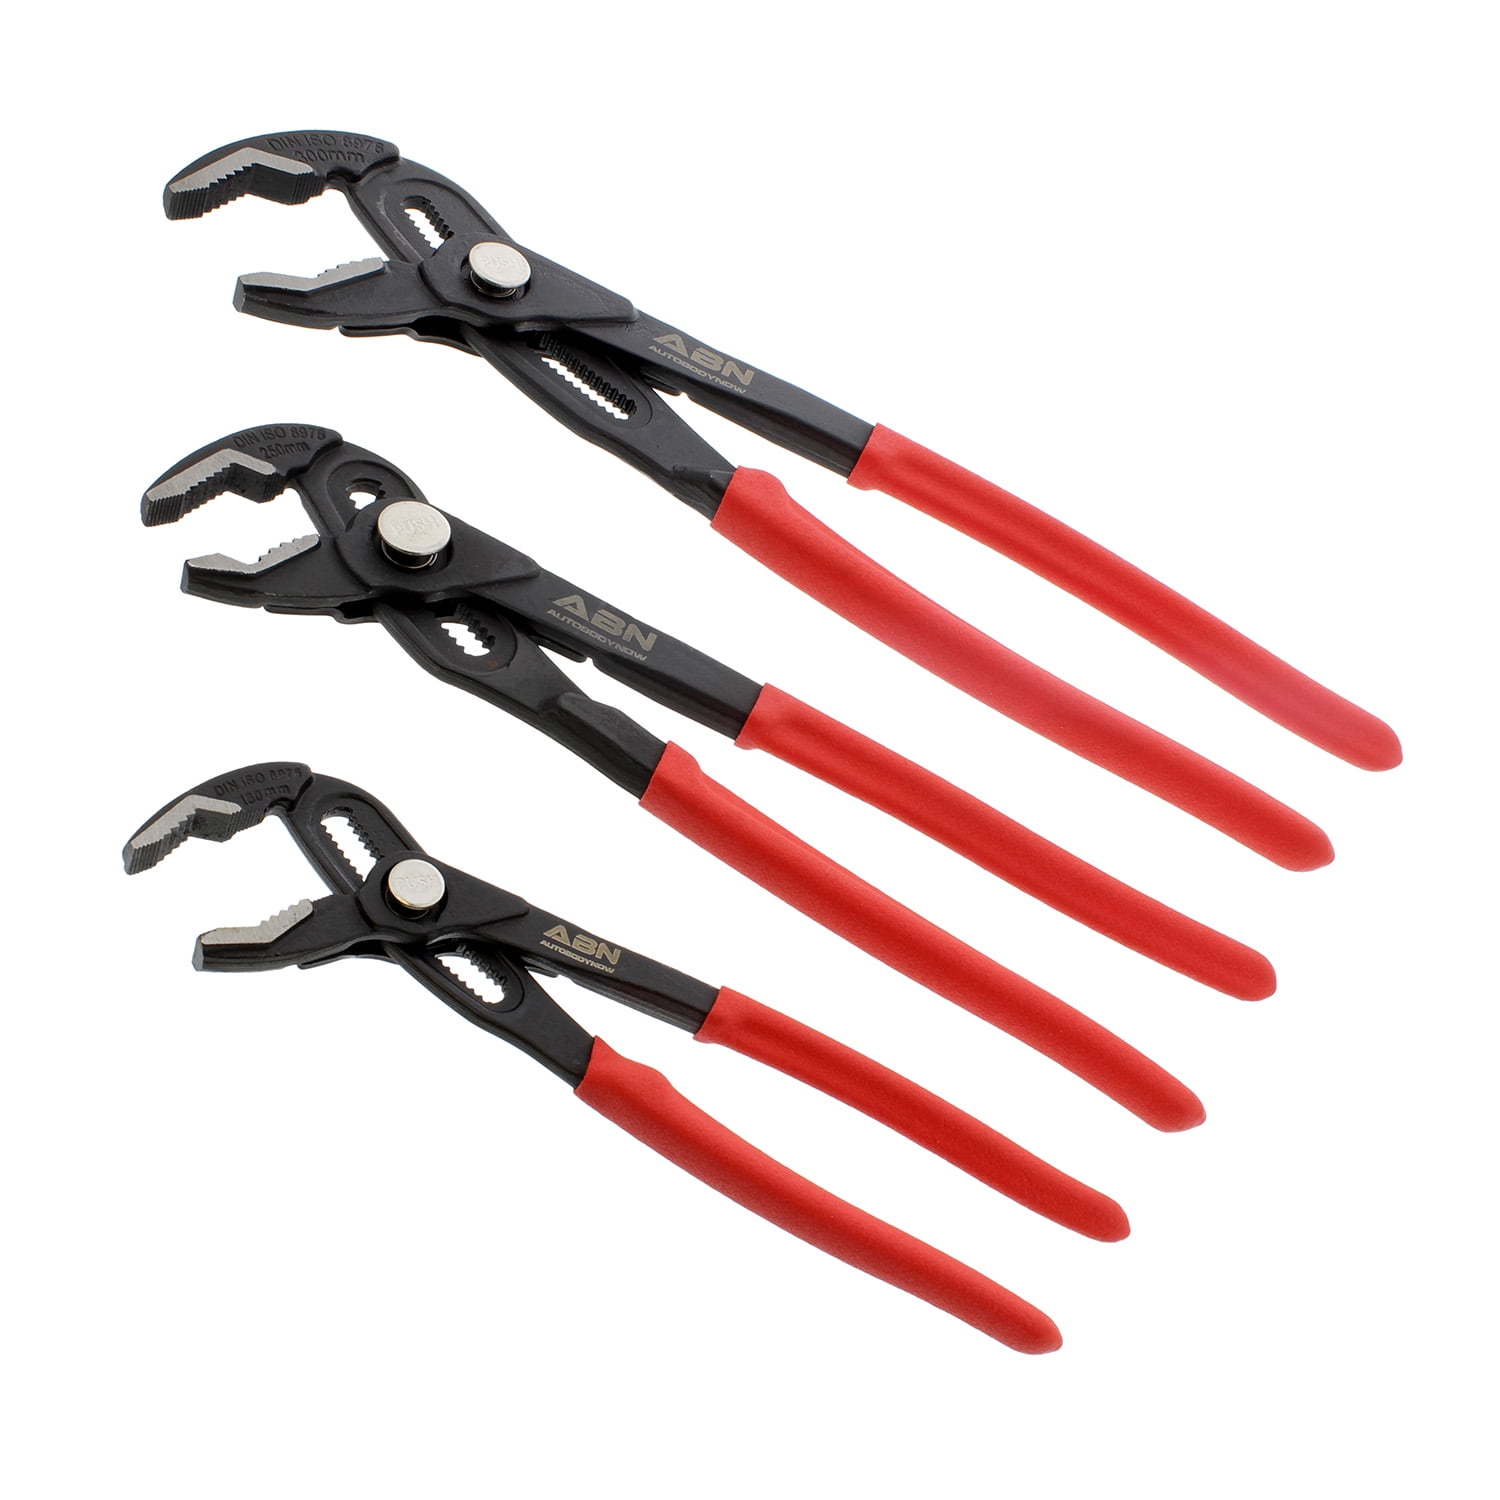 2-Piece Vanquish 3194 Slip Joint Plier and Tongue and Groove Plier Set